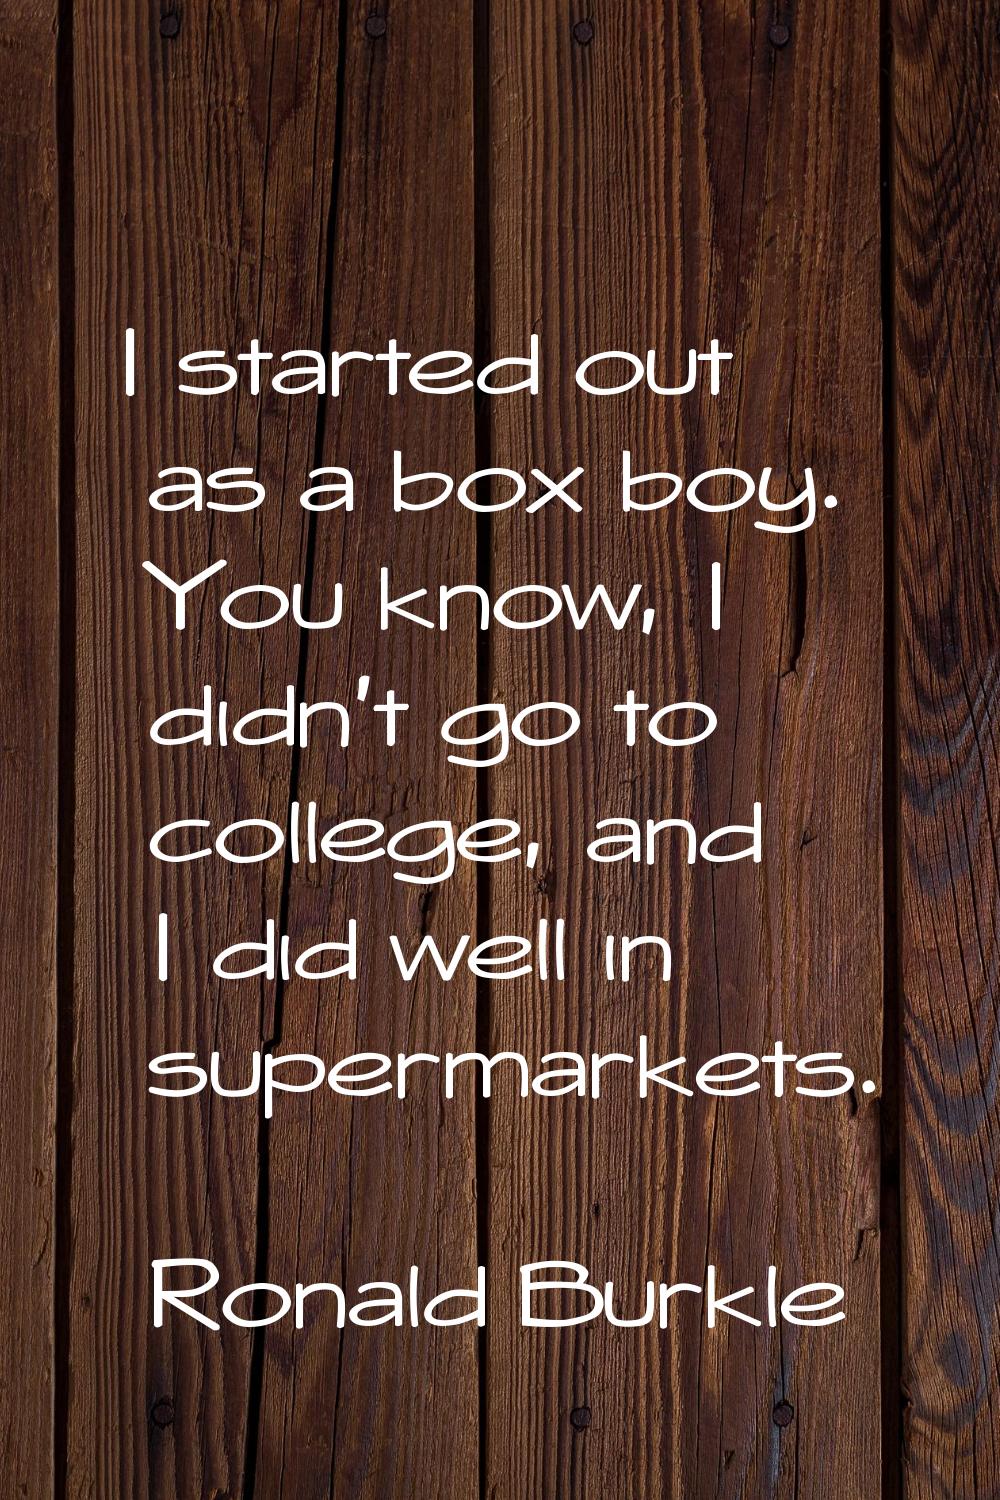 I started out as a box boy. You know, I didn't go to college, and I did well in supermarkets.